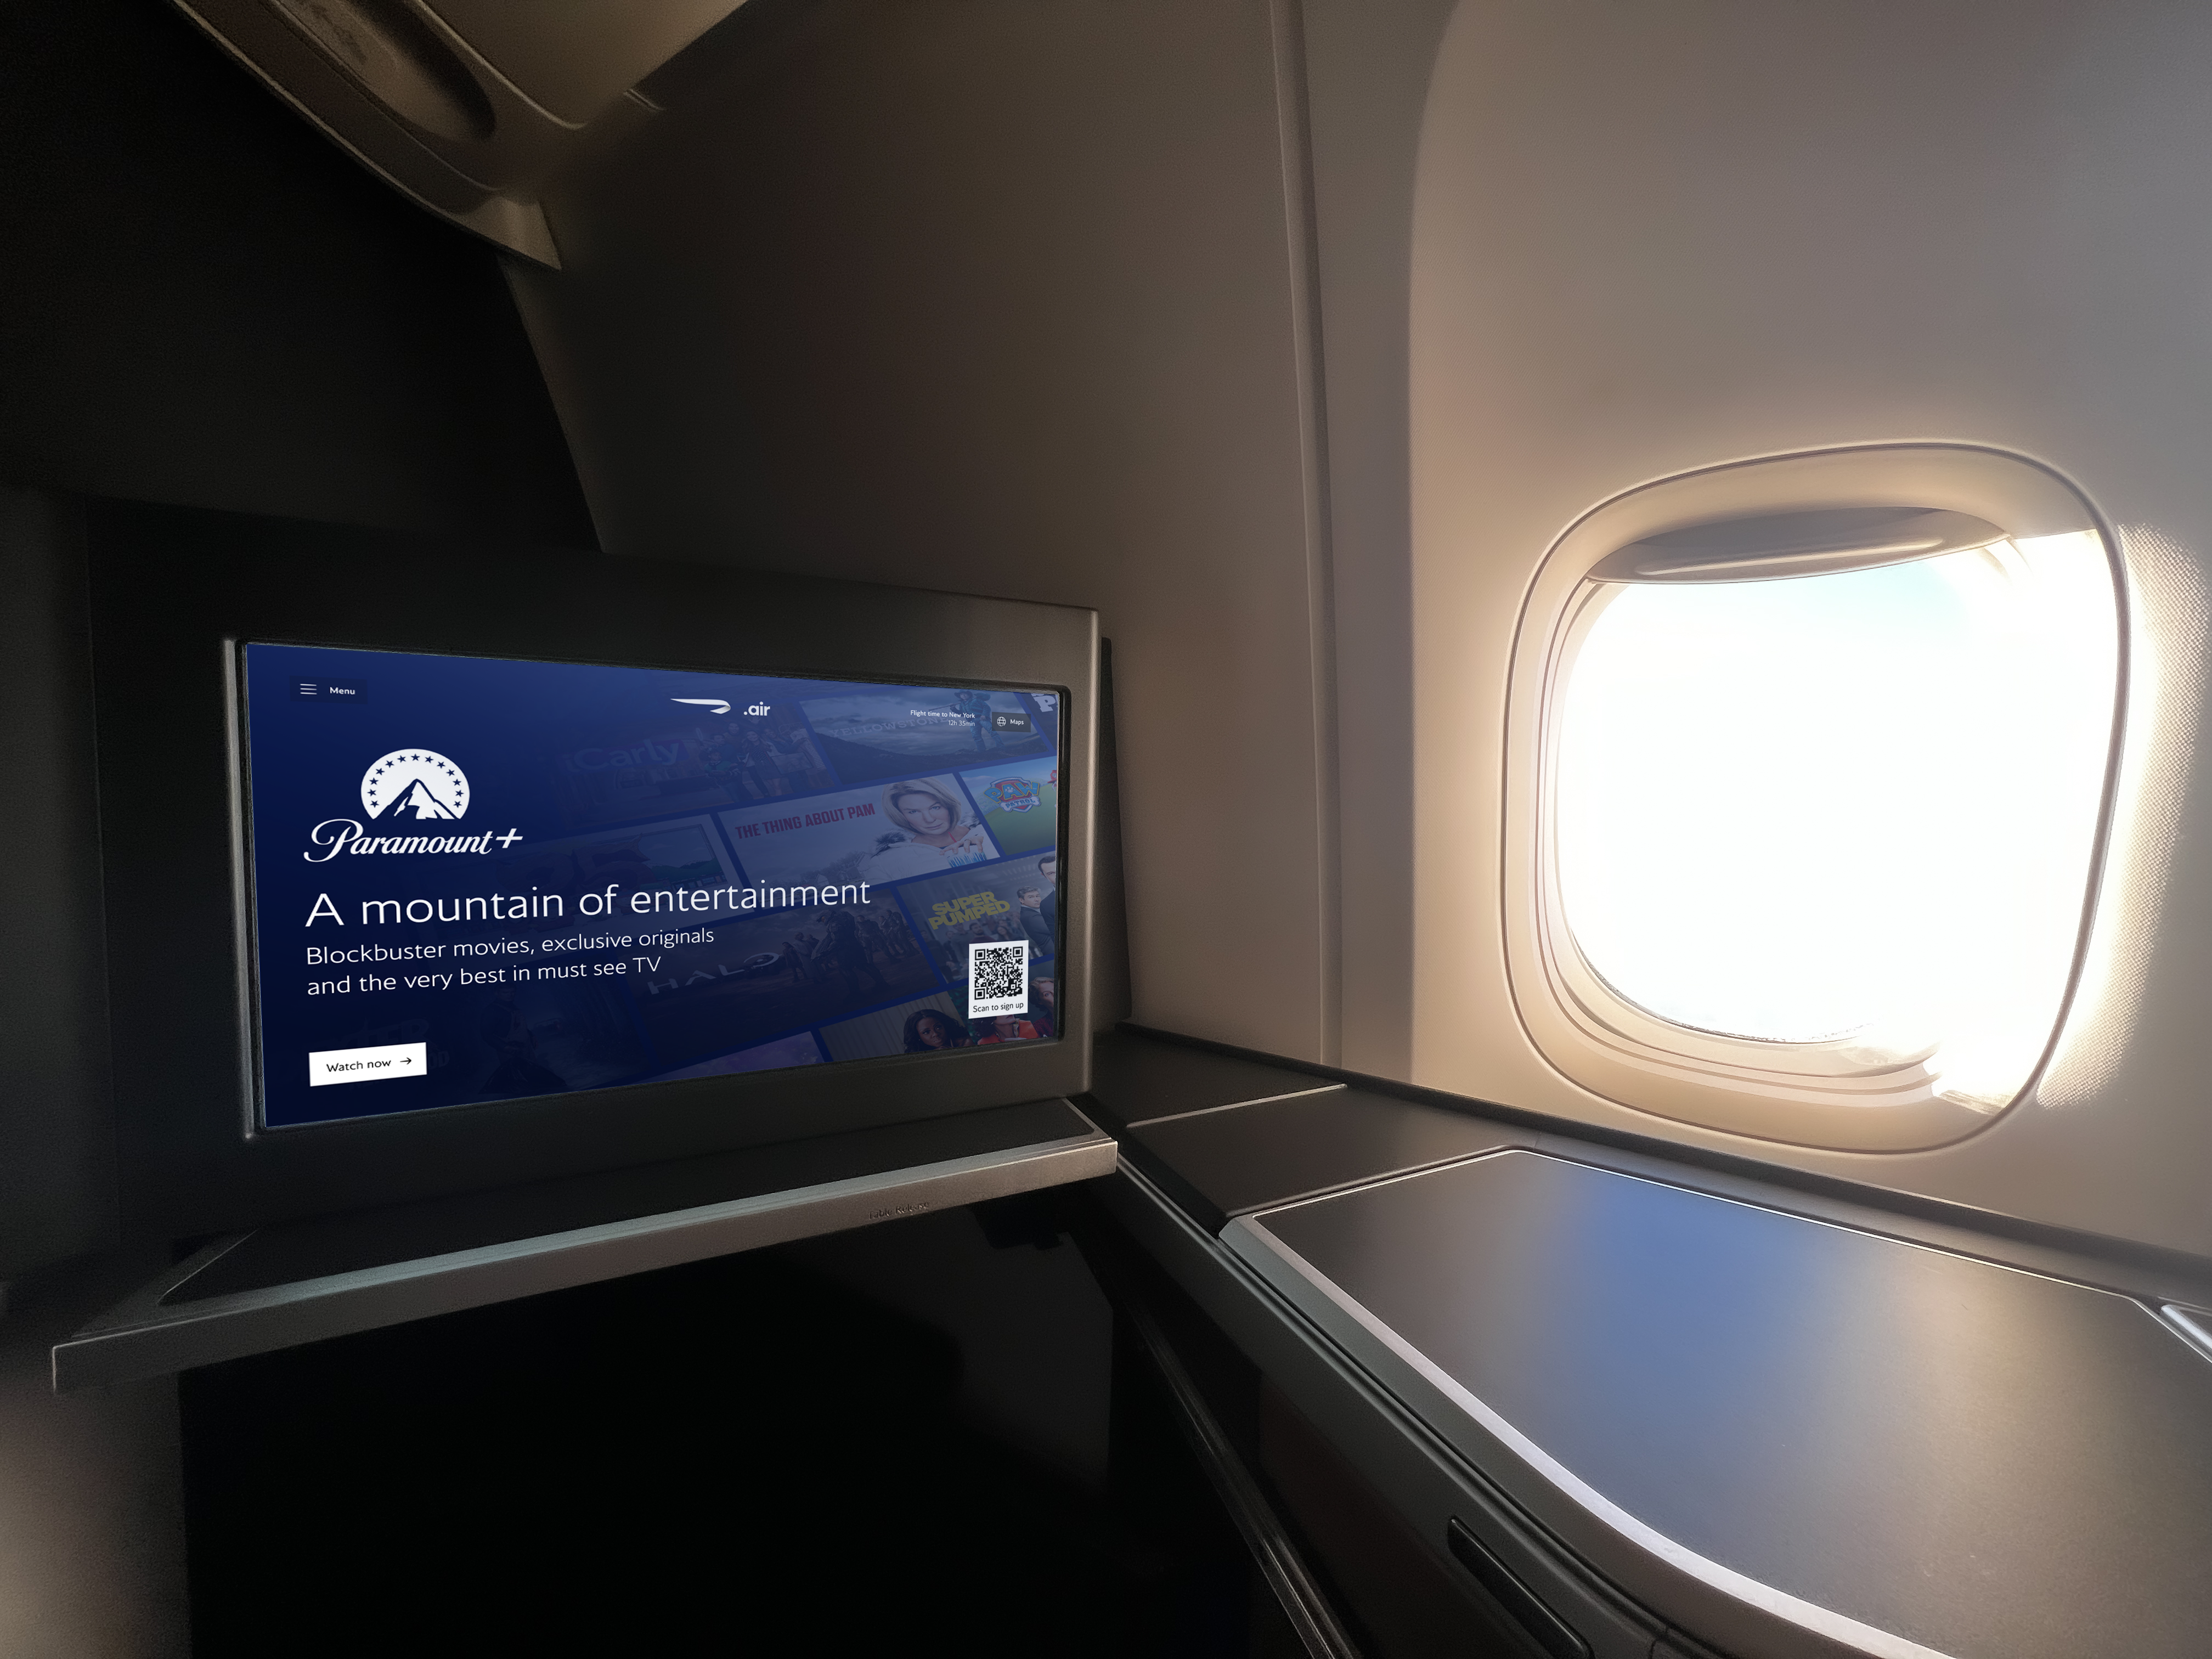 BA passengers can now enjoy Paramount+ on its longhaul services